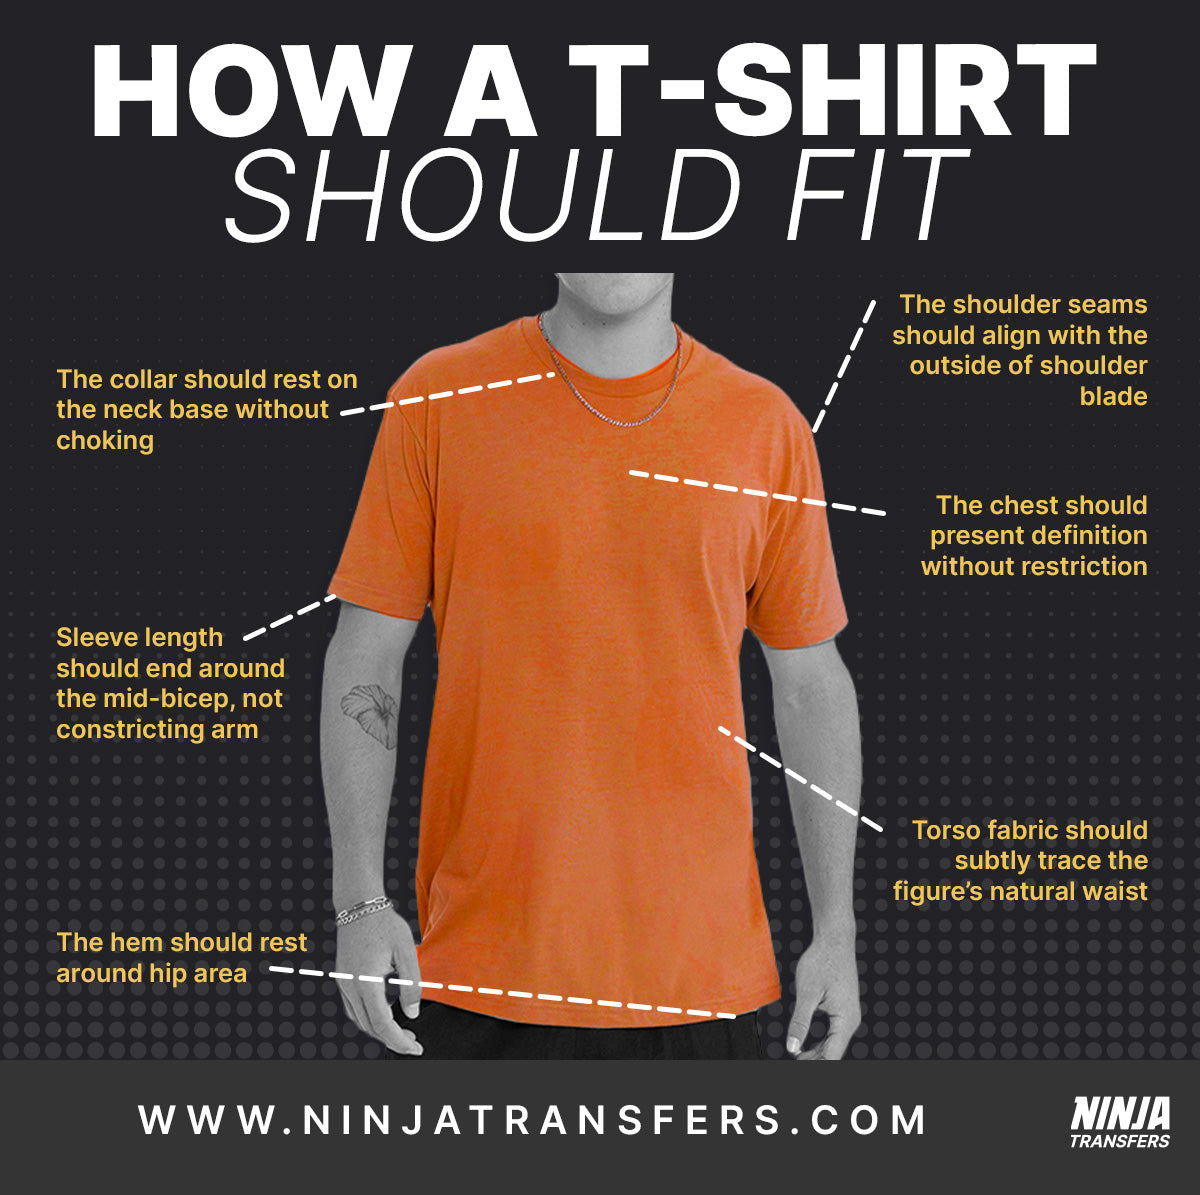 How a T-shirt should fit infographic